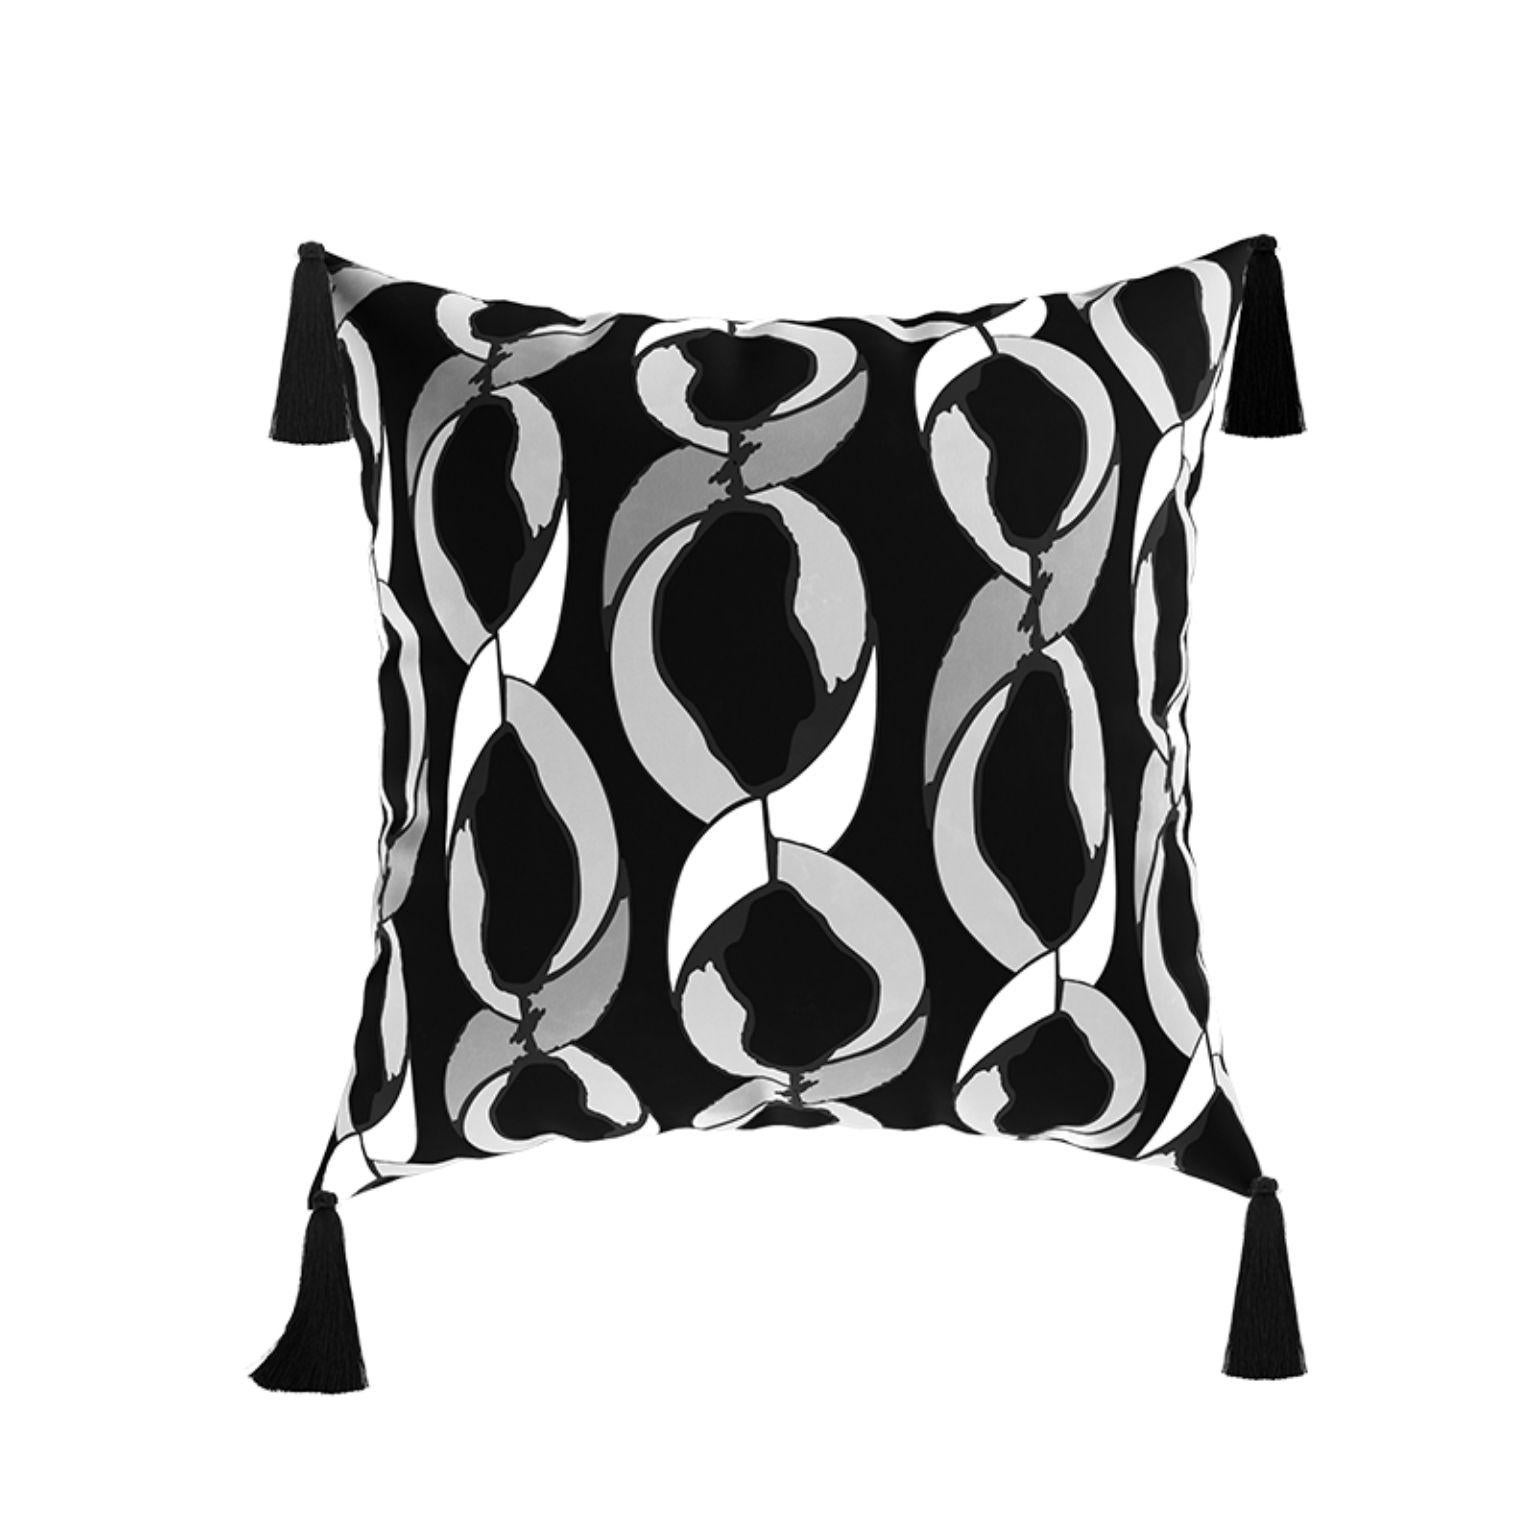 Black White Modern Throw Pillows, Geometric Velvet Pillow with Silk Tassels

Zadine cushion has a refined and attractive design pattern to complete your modern chair look, daybed, or sofa.
This cushion combines beautiful black and white shades.  ACH